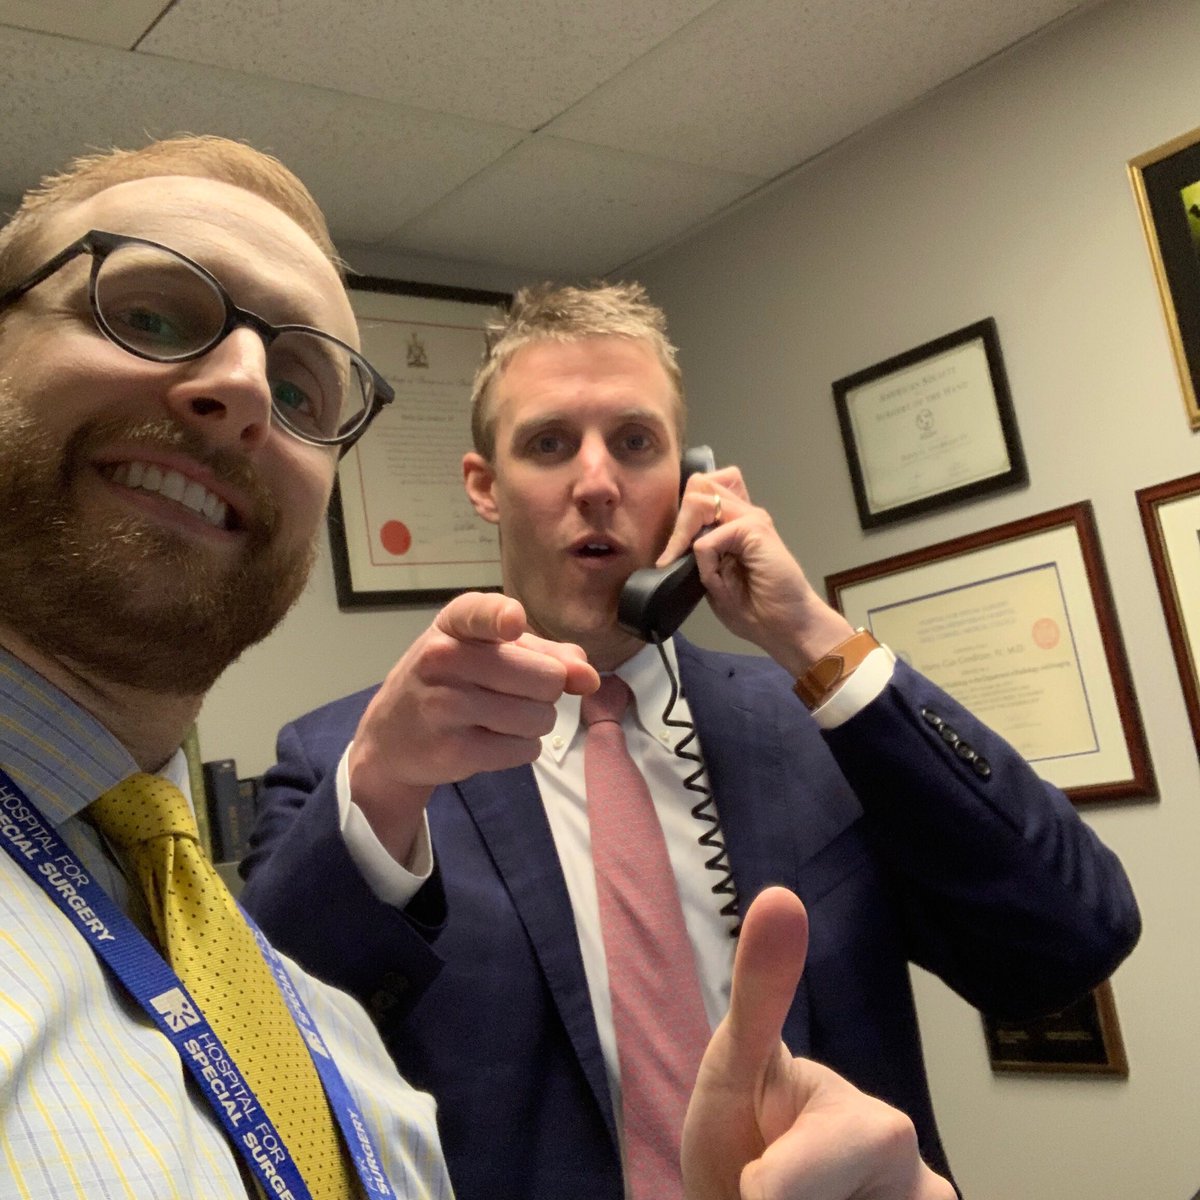 It’s Thursday morning and we are making deals... not really... we’re reviewing Dr. Fabricant’s patient’s hip MRI. Team approach to patient care. #hss #pediatrics #pediatricsurgery #pediatricsurgeon #orthopedicsurgery #ortho #sportsmedicine #radiology #mri #labrum #arthroscopy